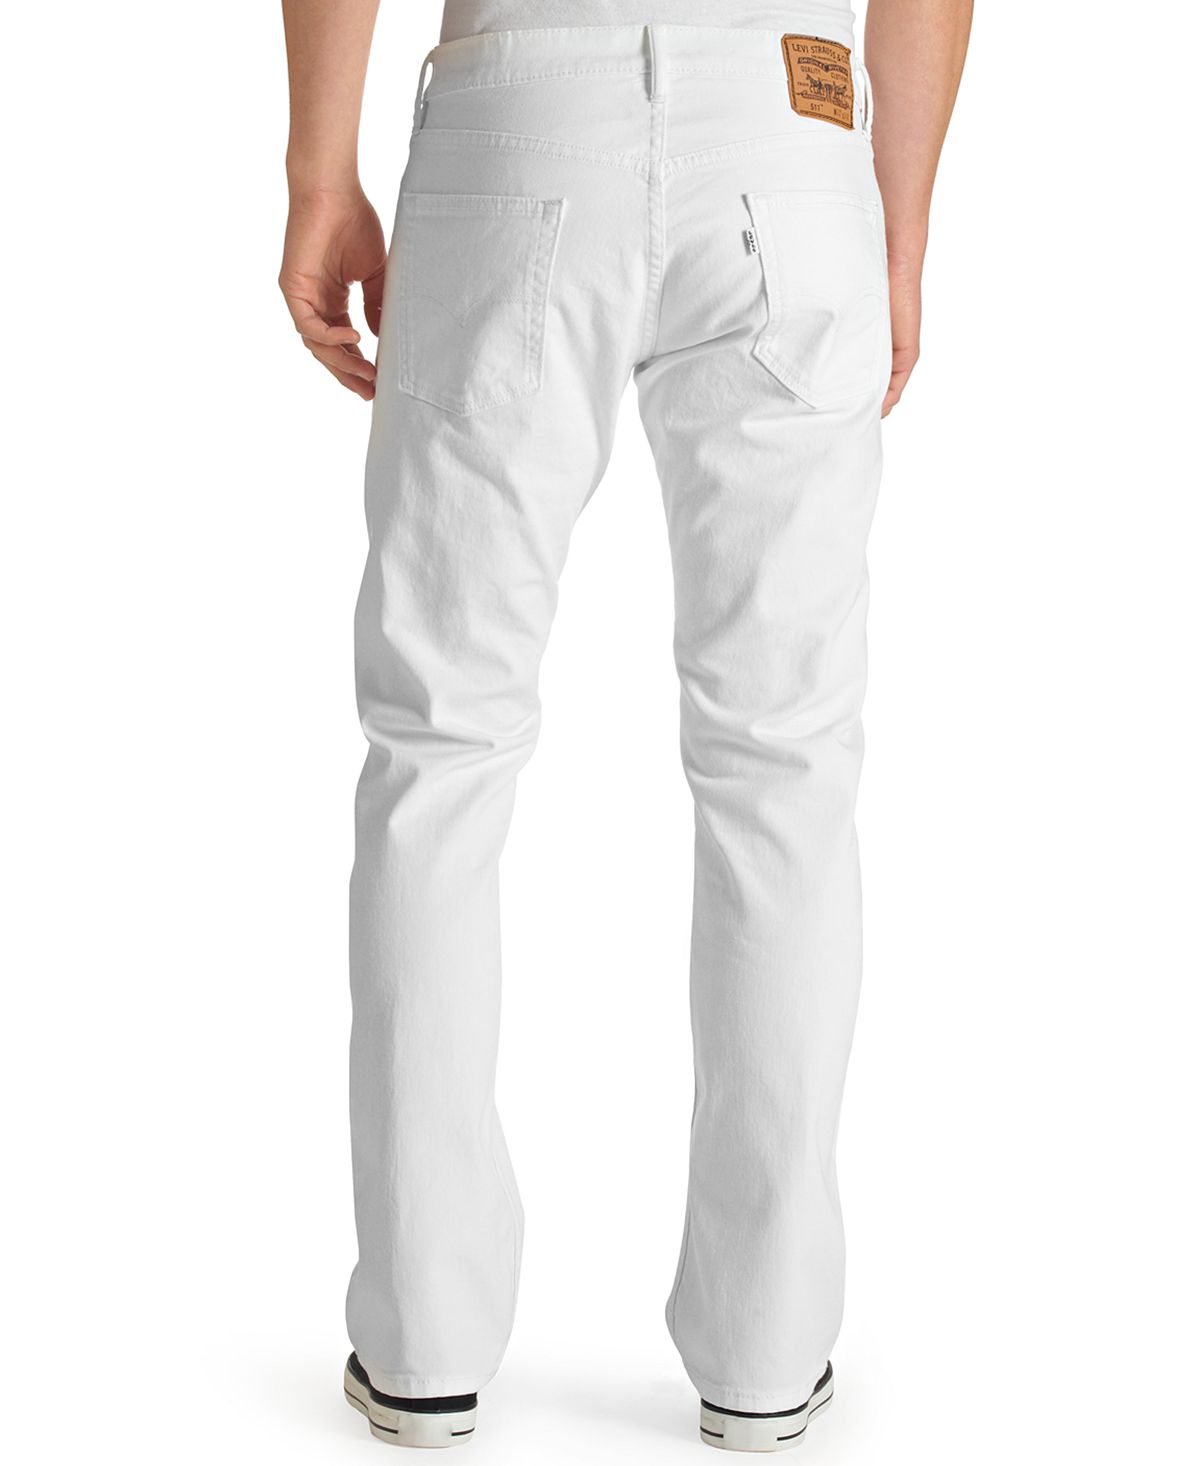 Levi's 514 Straight Fit Jeans White Stretch